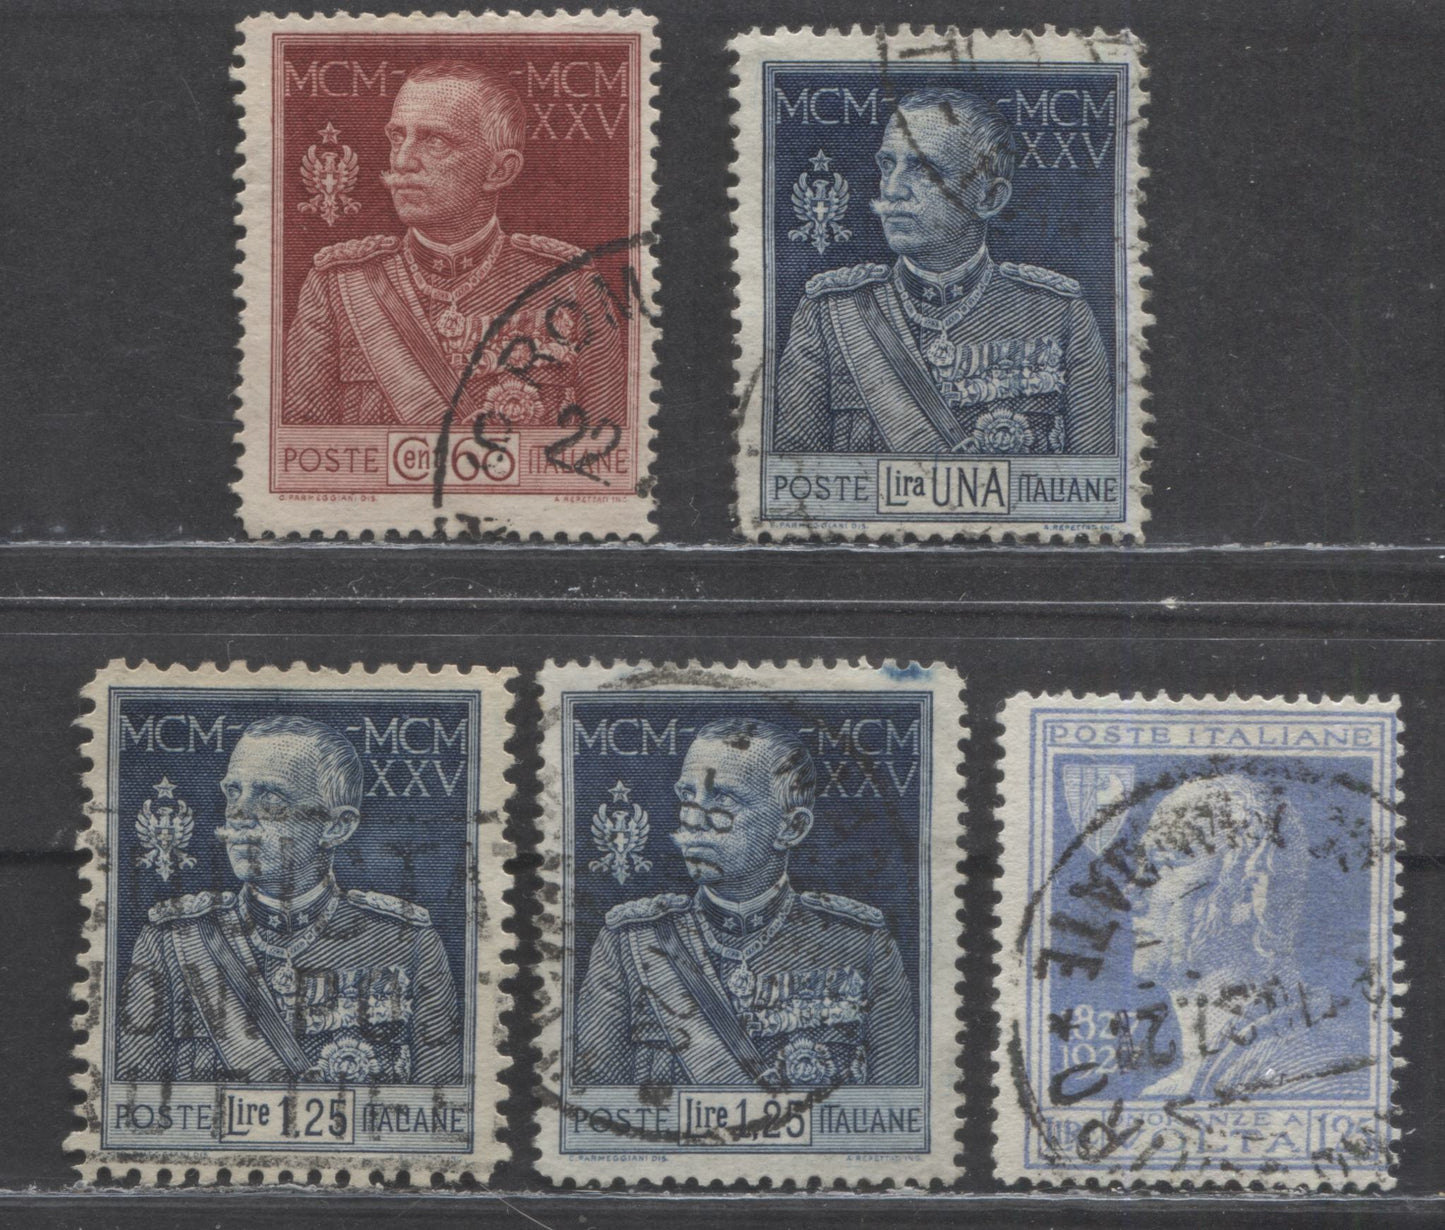 Lot 387 Italy SC#175a/191 1925-1927 Coltat Emmanuel III High Values, 5 Fine Used Singles, Click on Listing to See ALL Pictures, Estimated Value $76 USD